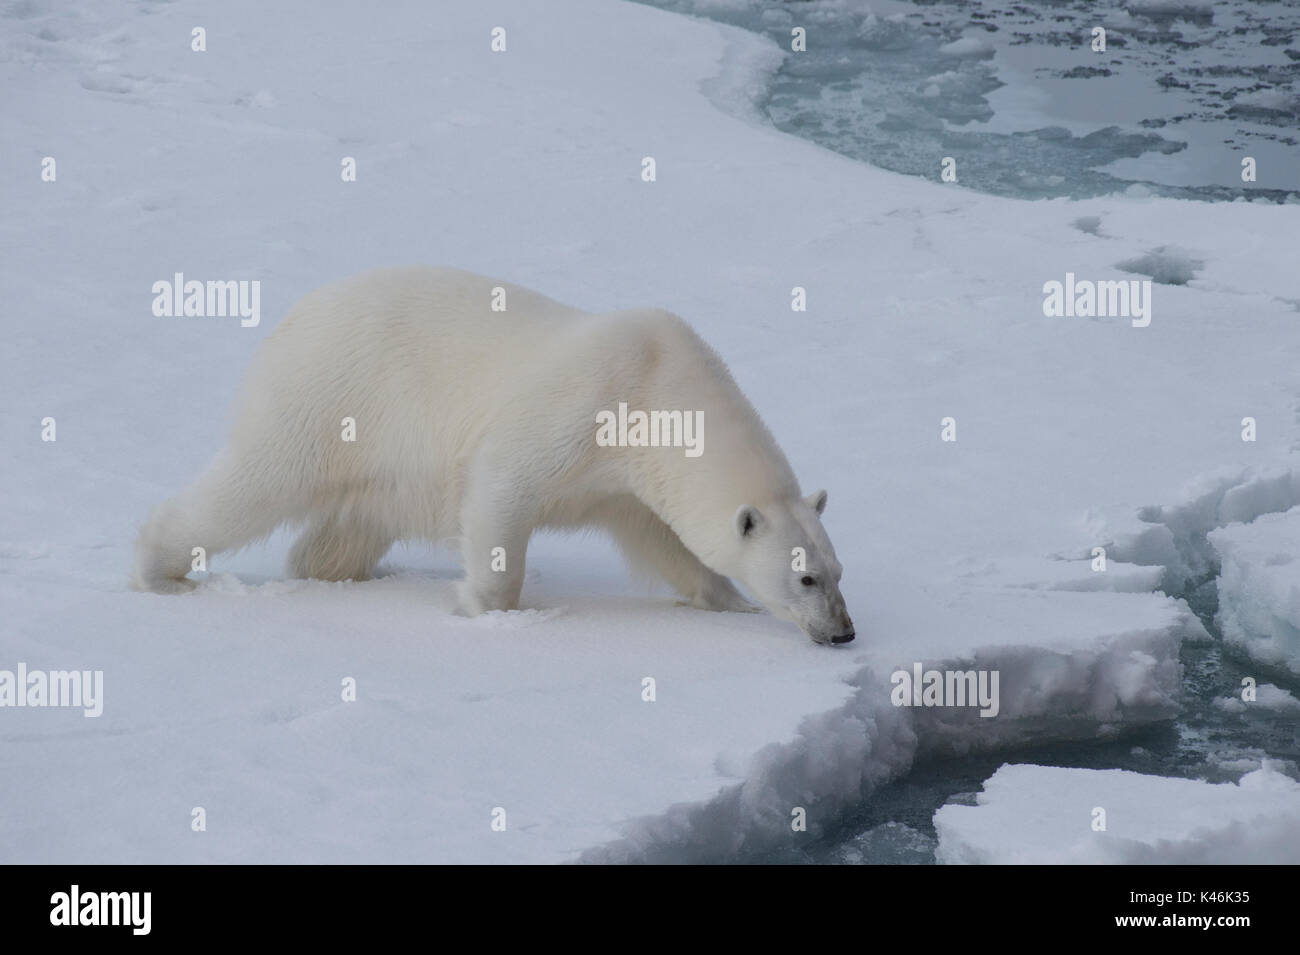 Big polar bear on drift ice edge with snow a water in Arctic North Pole Stock Photo